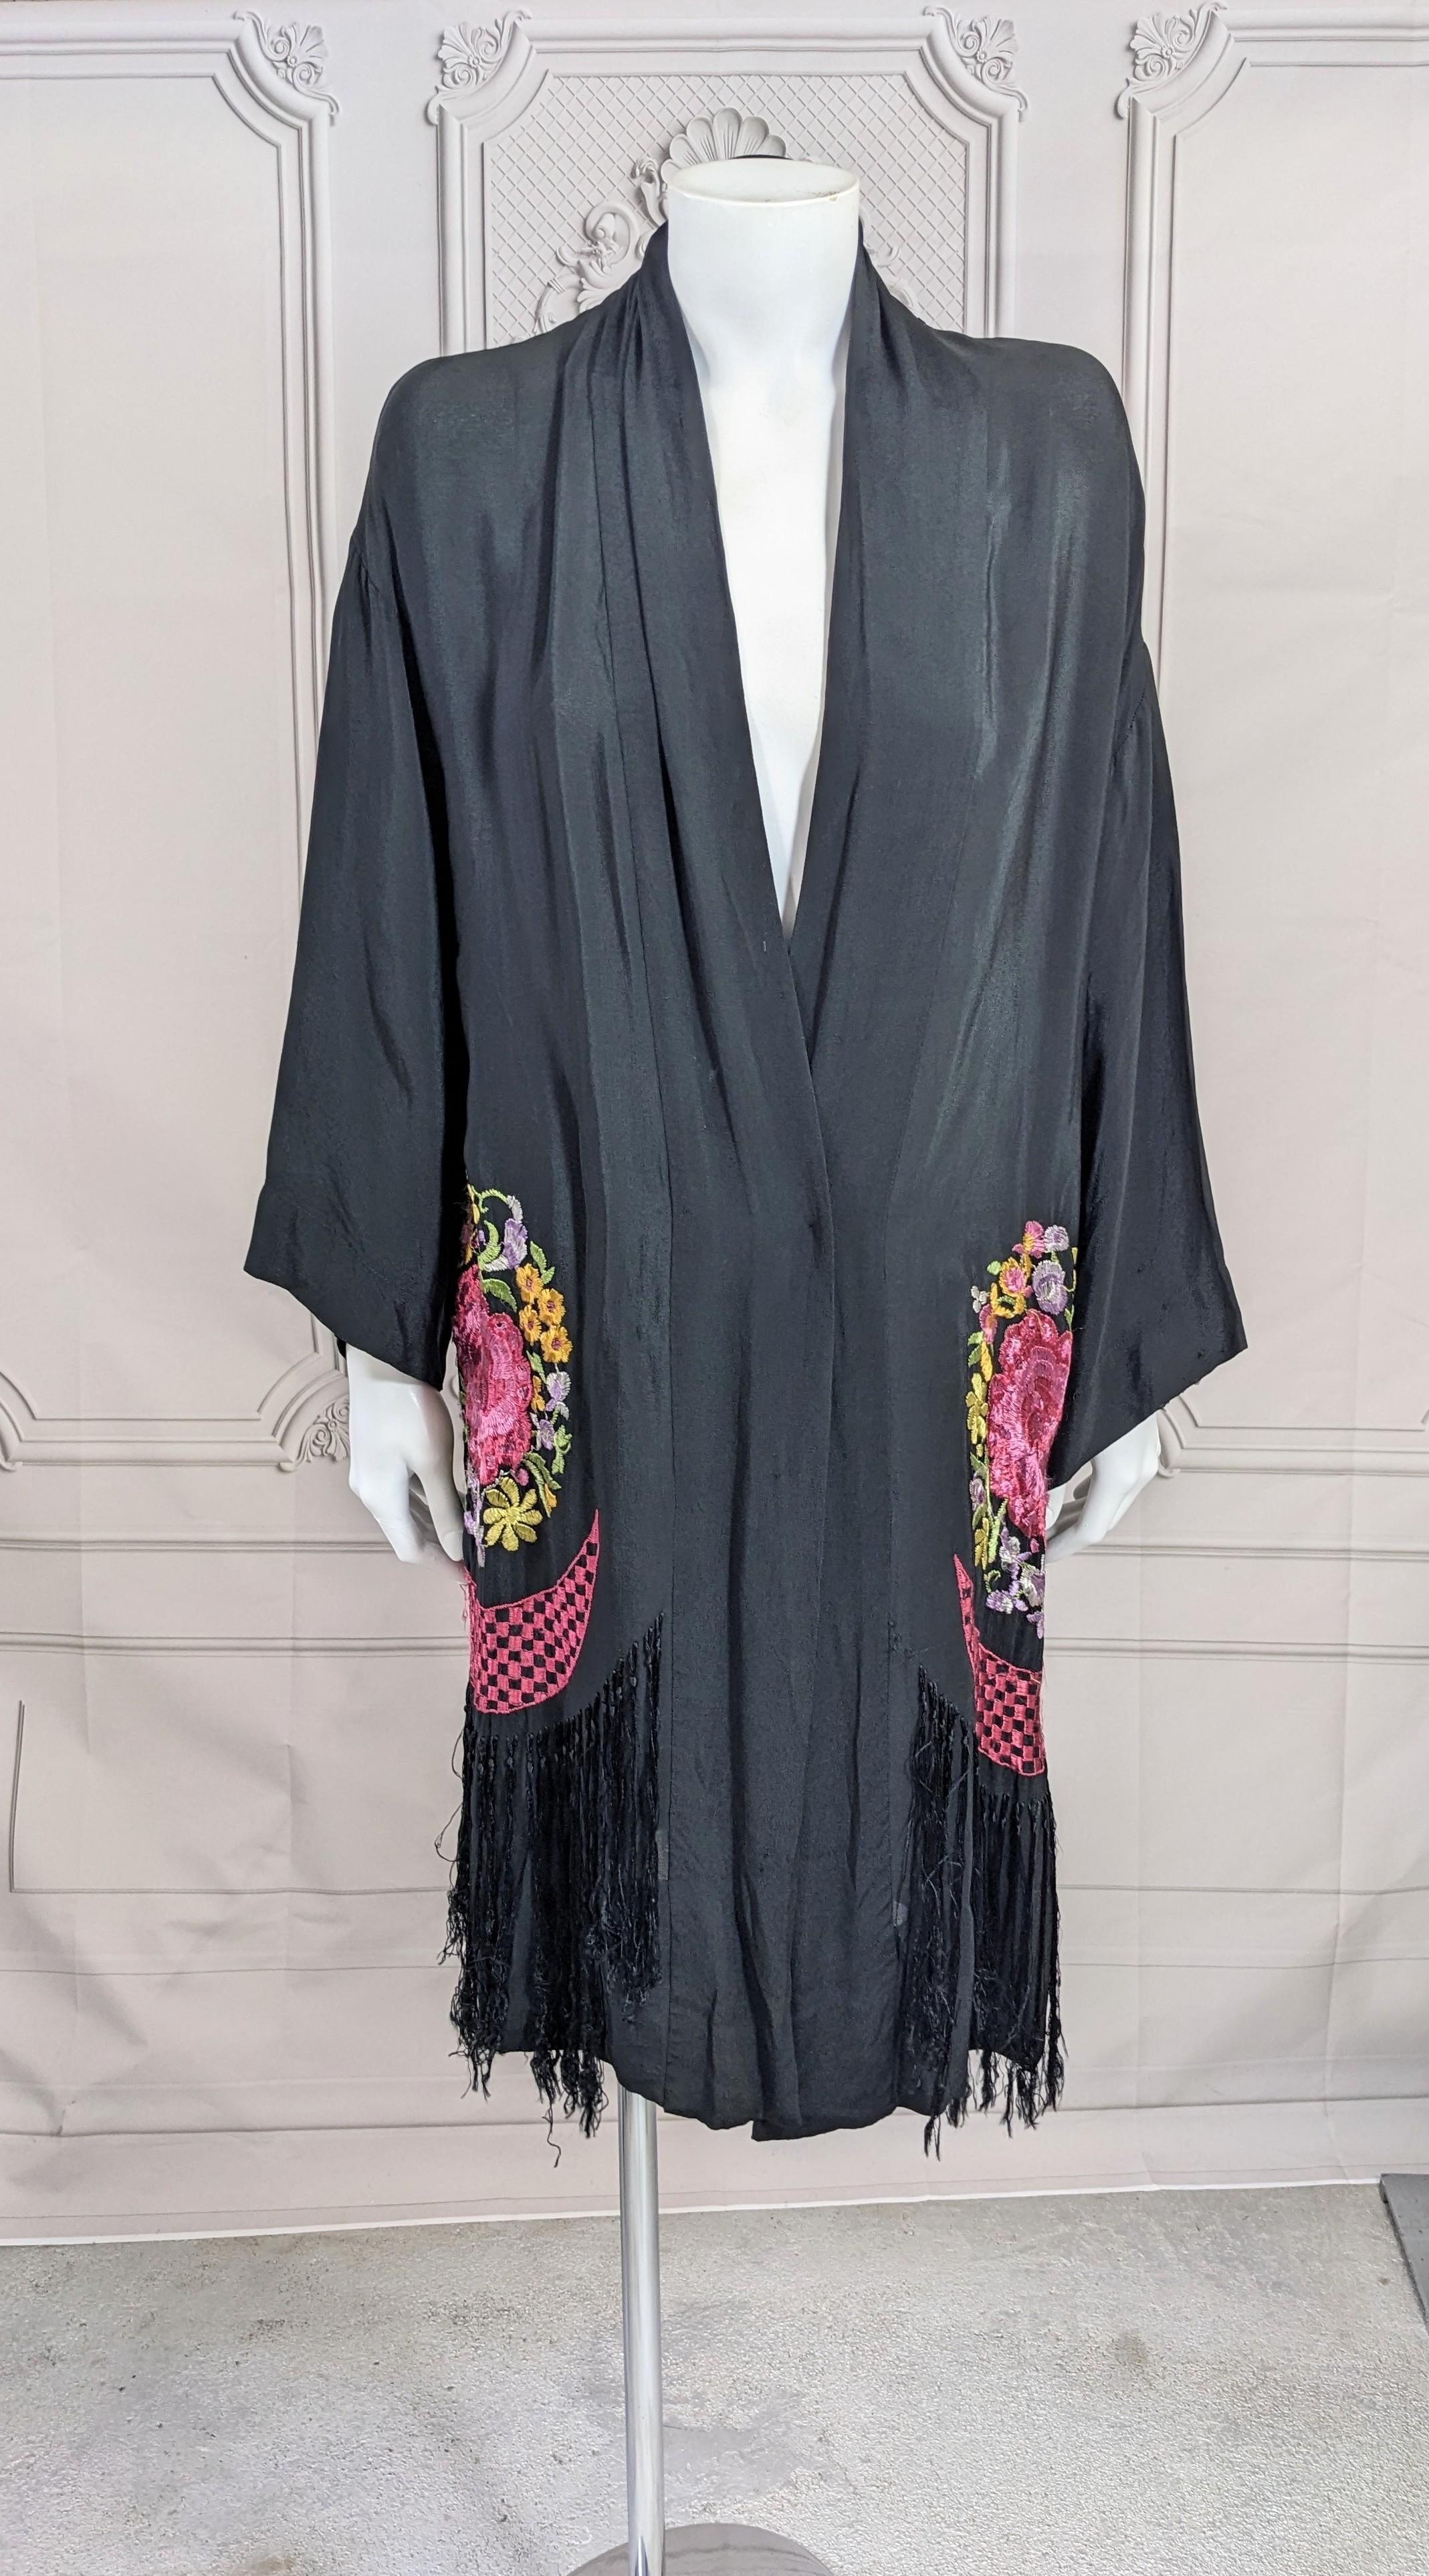 Art Deco Embroidered Fringe Robe from the 1920's which can easily be worn belted as a top or  jacket. Wrap kimono style with no closures. Floral embroidered Art Deco round panels with fringed hem. Rayon crepe. Fits Small- Medium. 1920's USA. 